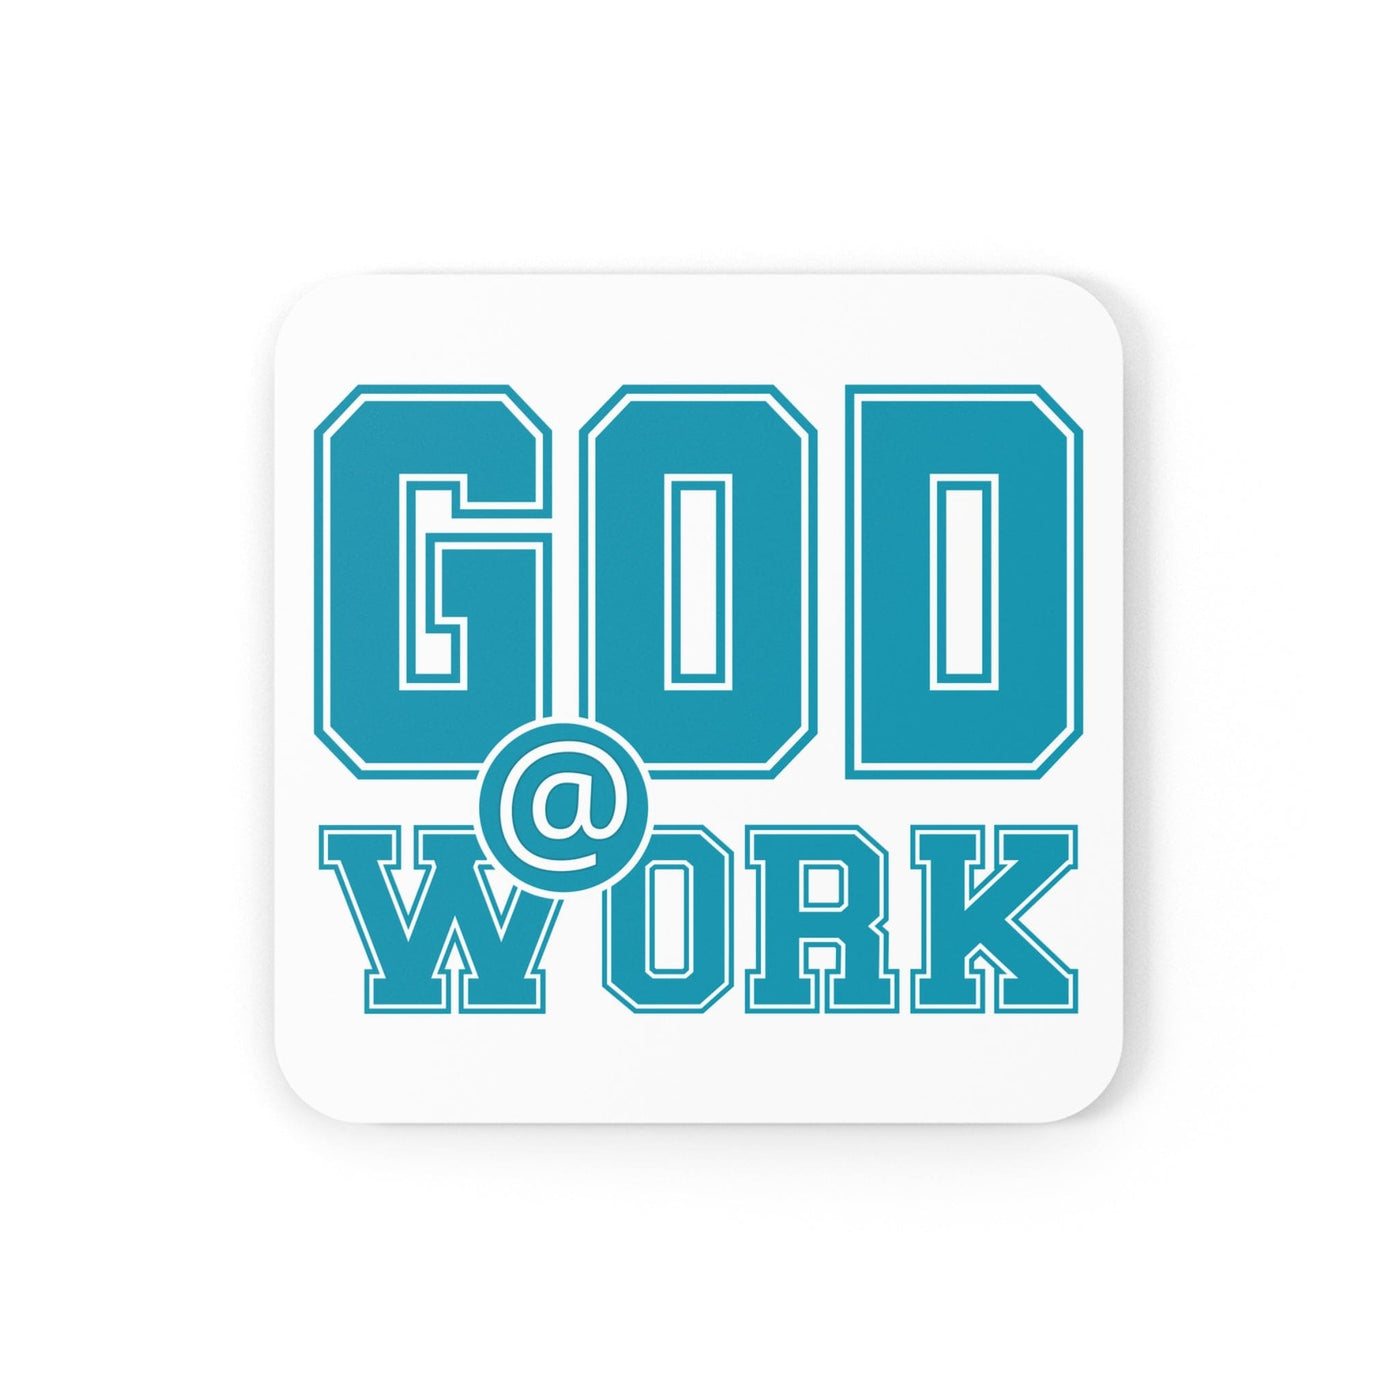 Coaster Set Of 4 For Drinks God @ Work Blue Green And White Print - Decorative